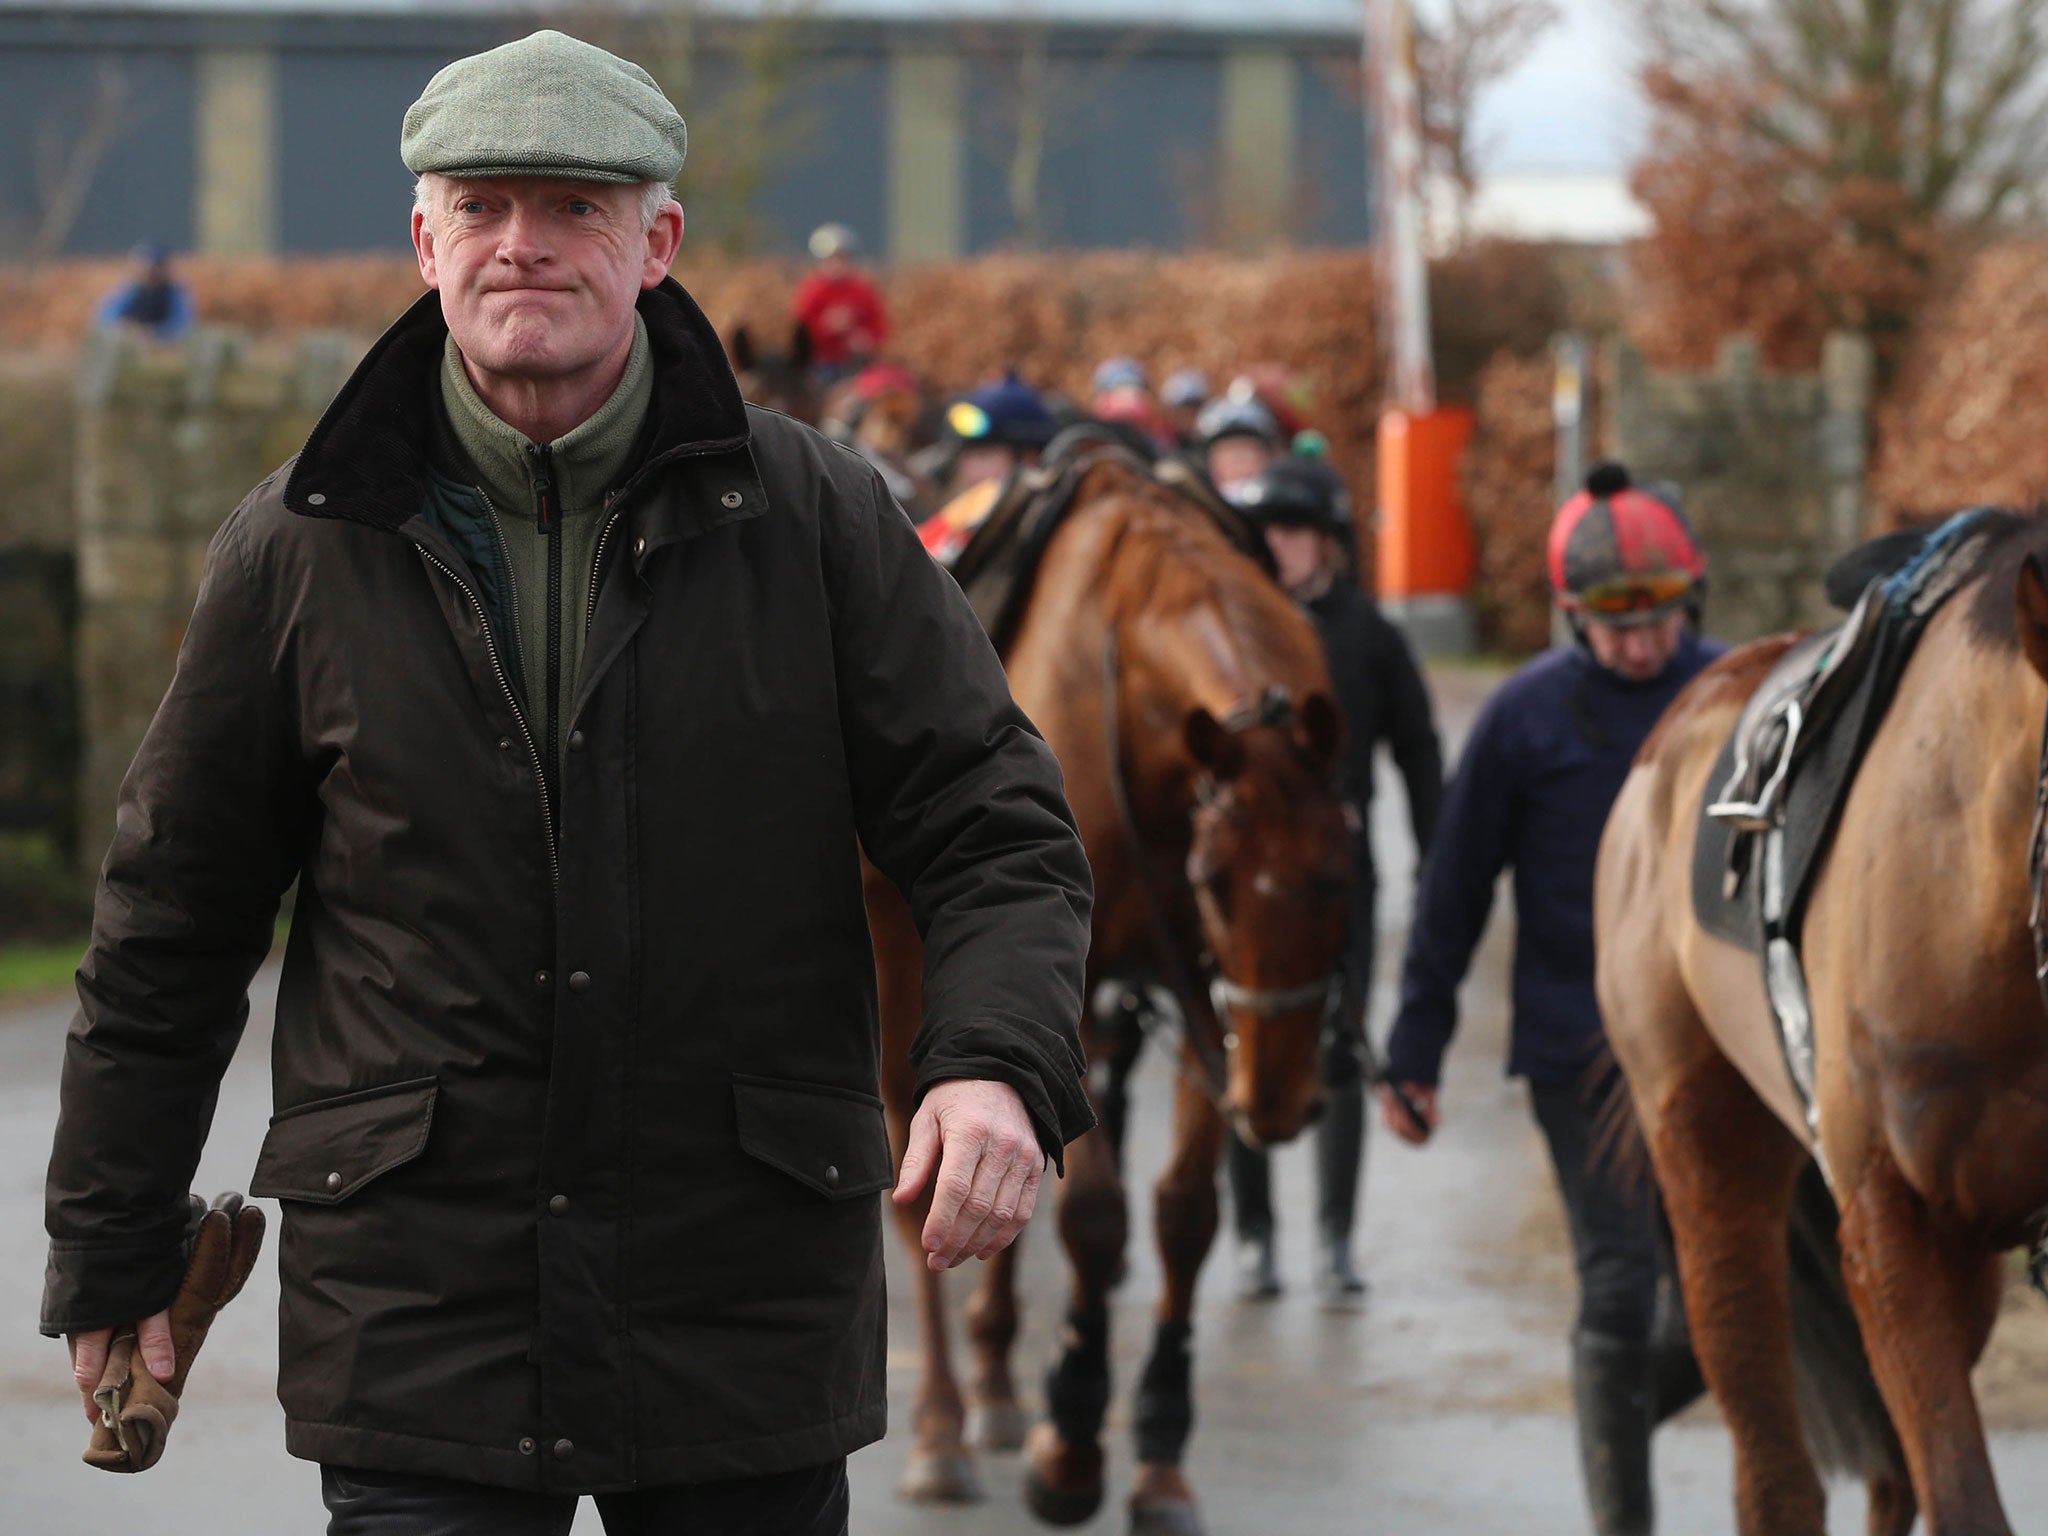 Willie Mullins leads some of his horses out on the gallops at his yard in County Carlow in Ireland